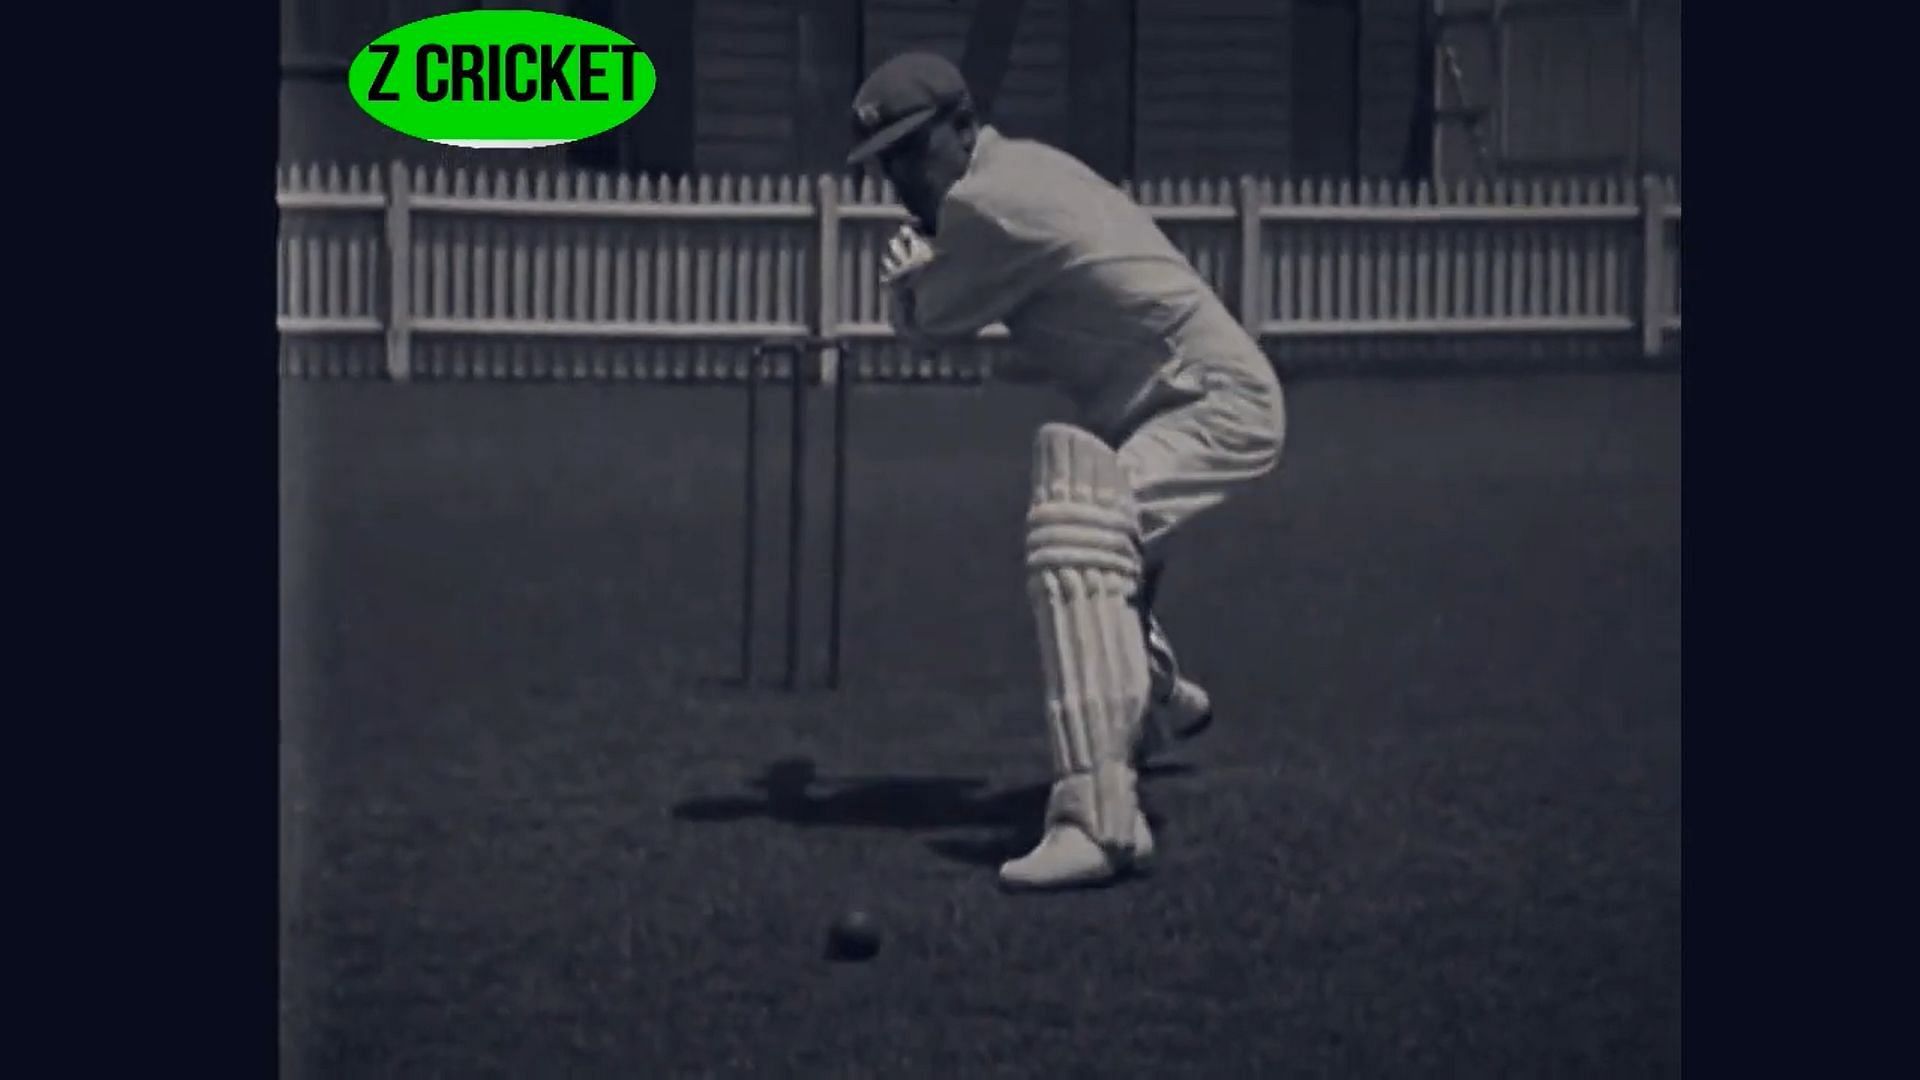 Charles Macartney was nicknamed the &#039;Governor General&#039; for his masterful style of batting (Image: YouTube/Z Cricket)